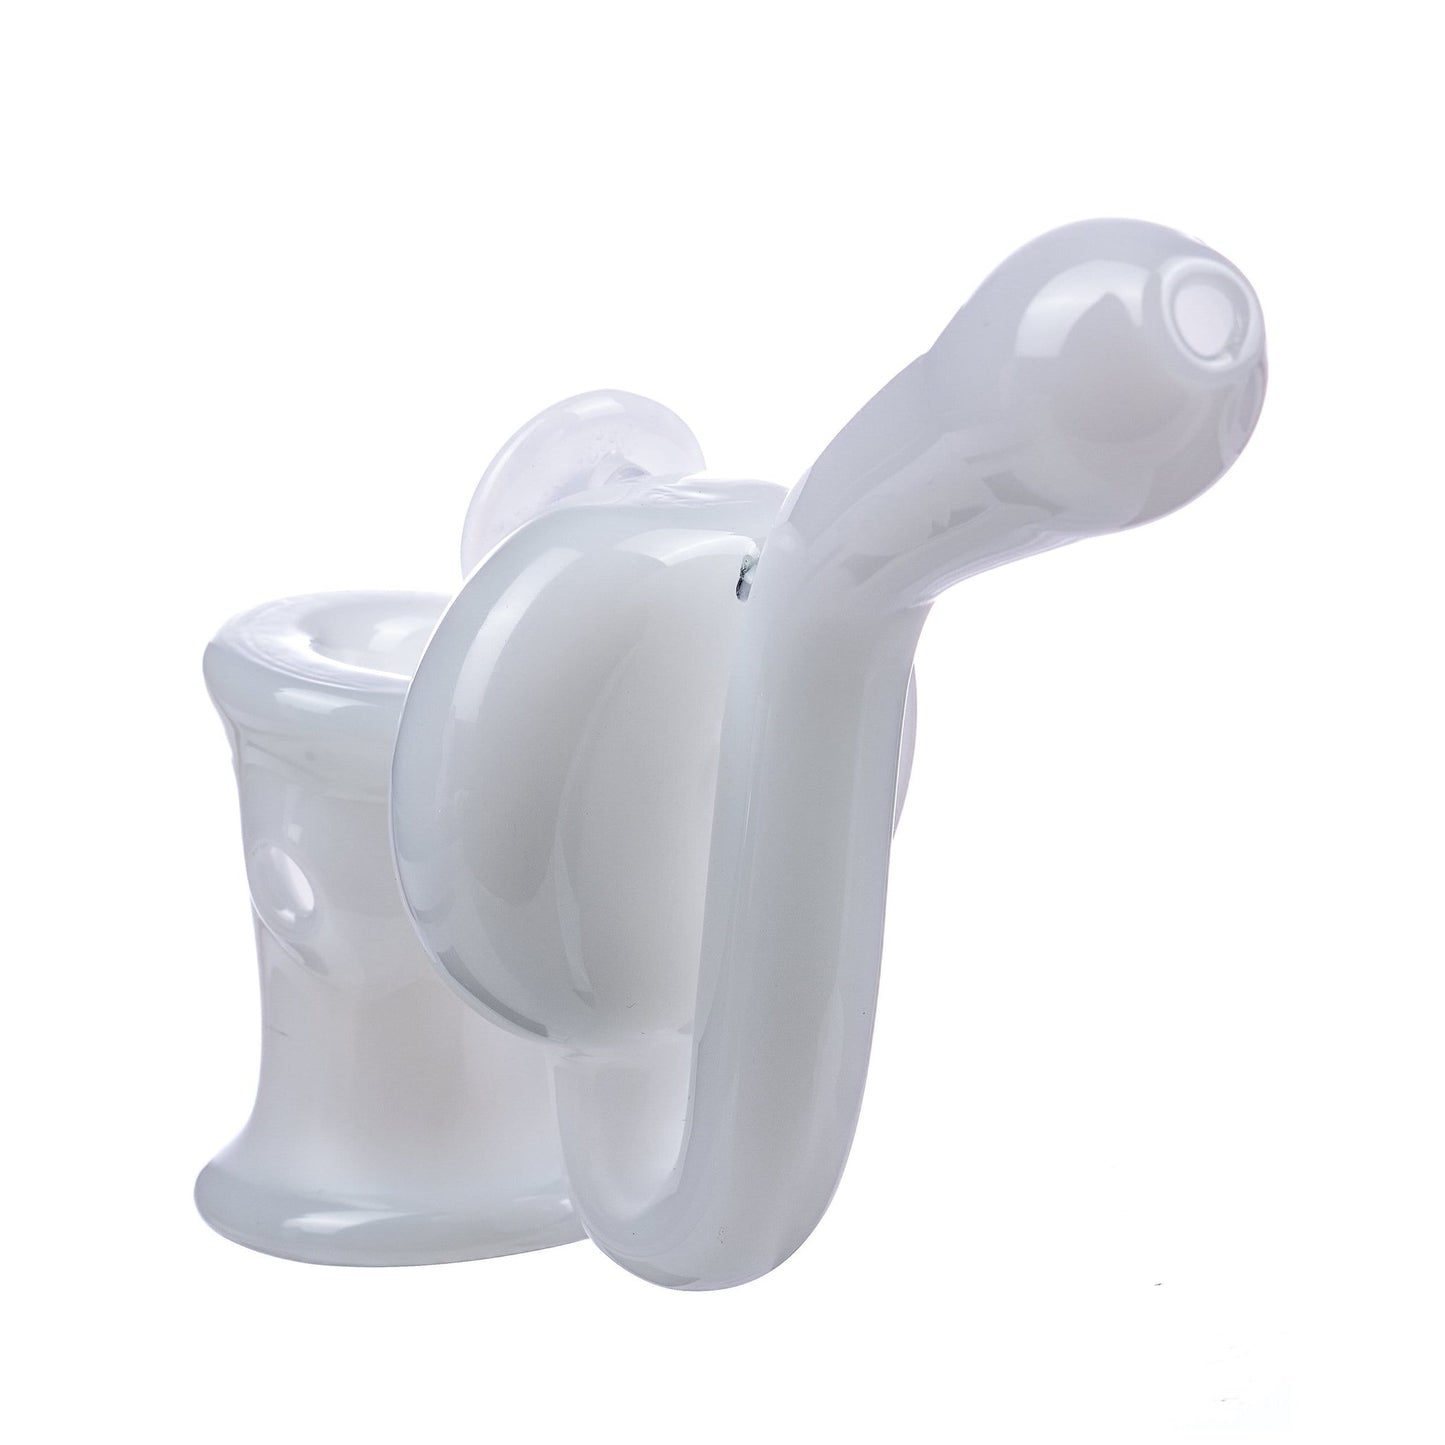 LA Pipes Toilet Bowl Sherlock Pipe by LA Pipes | Mission Dispensary